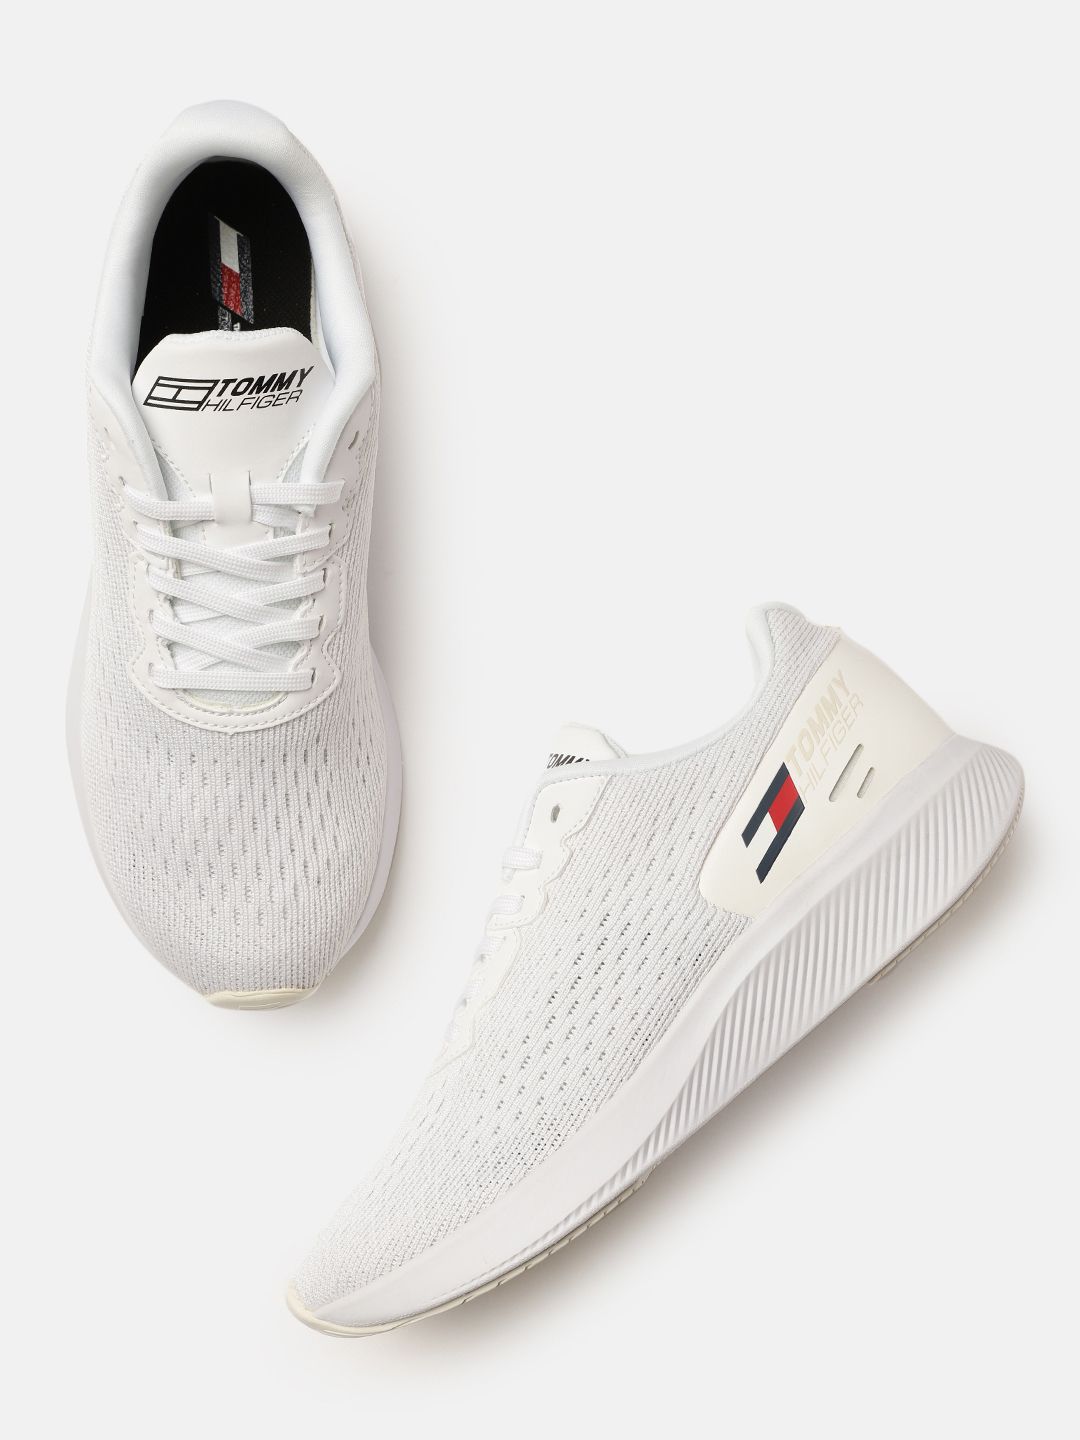 Tommy Hilfiger Women White Textured Regular Sneakers With Tech Foam Midsole Price in India